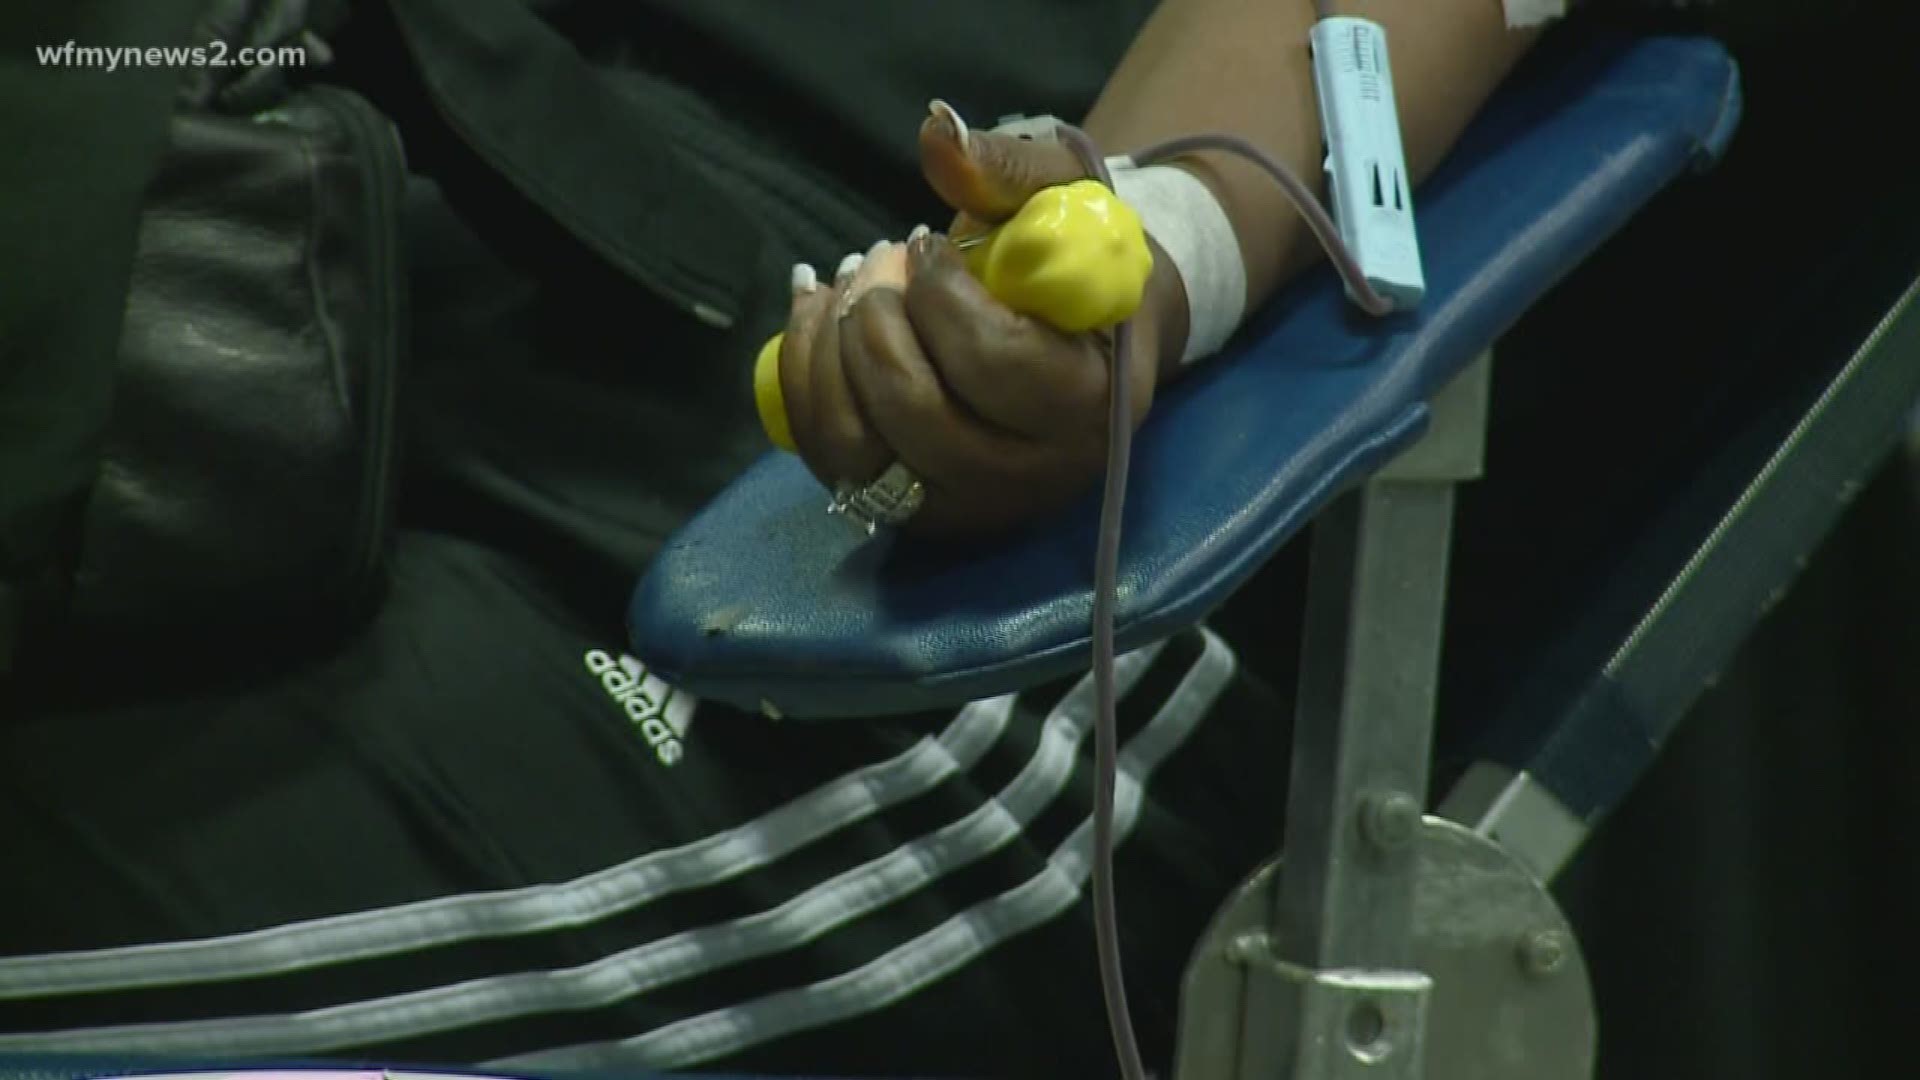 In light of the WFMY News 2 55th-annual Holiday Blood Drive, we VERIFY common misconceptions that might deter donations.